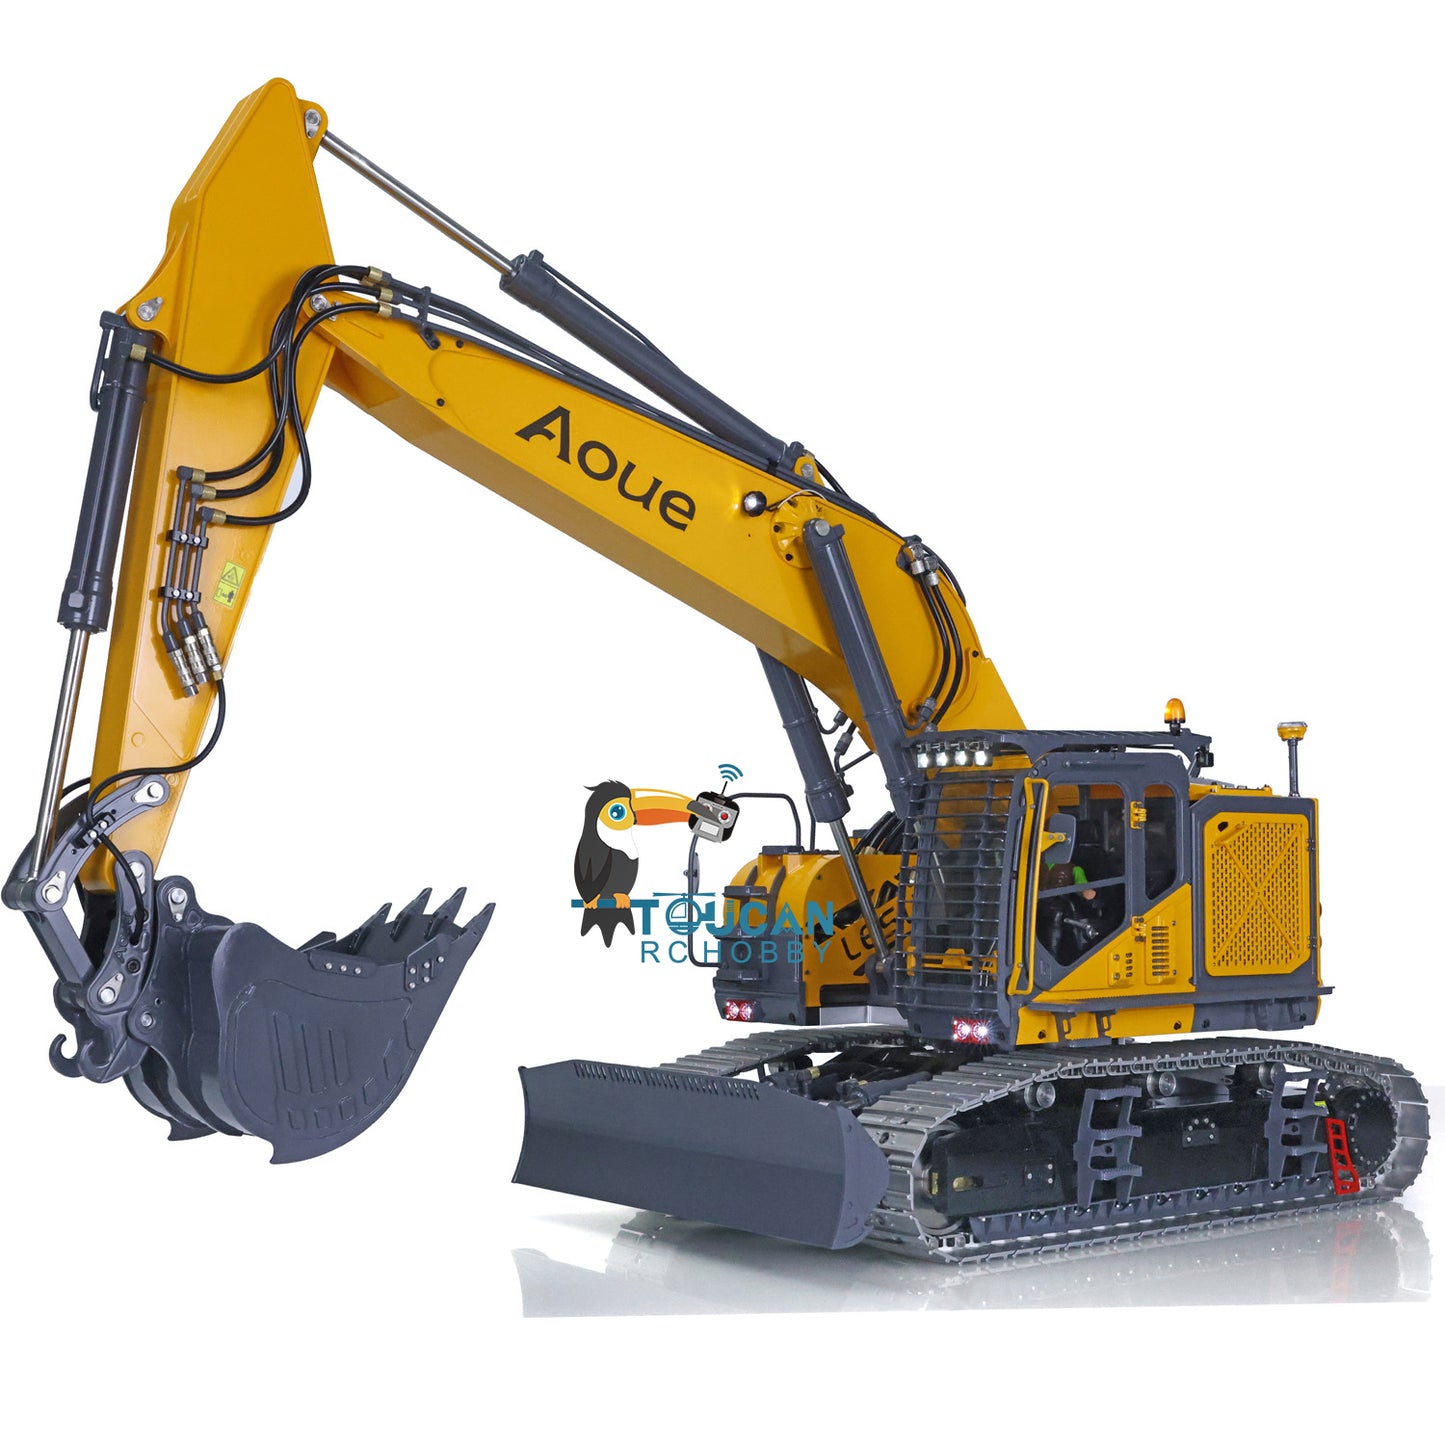 IN STOCK LESU Metal RC 1/14 Hydraulic Aoue ET35 Excavator Tracks Detachable Fixed Mount Crusher Pliers Tiltable Bucket Grab Grapple